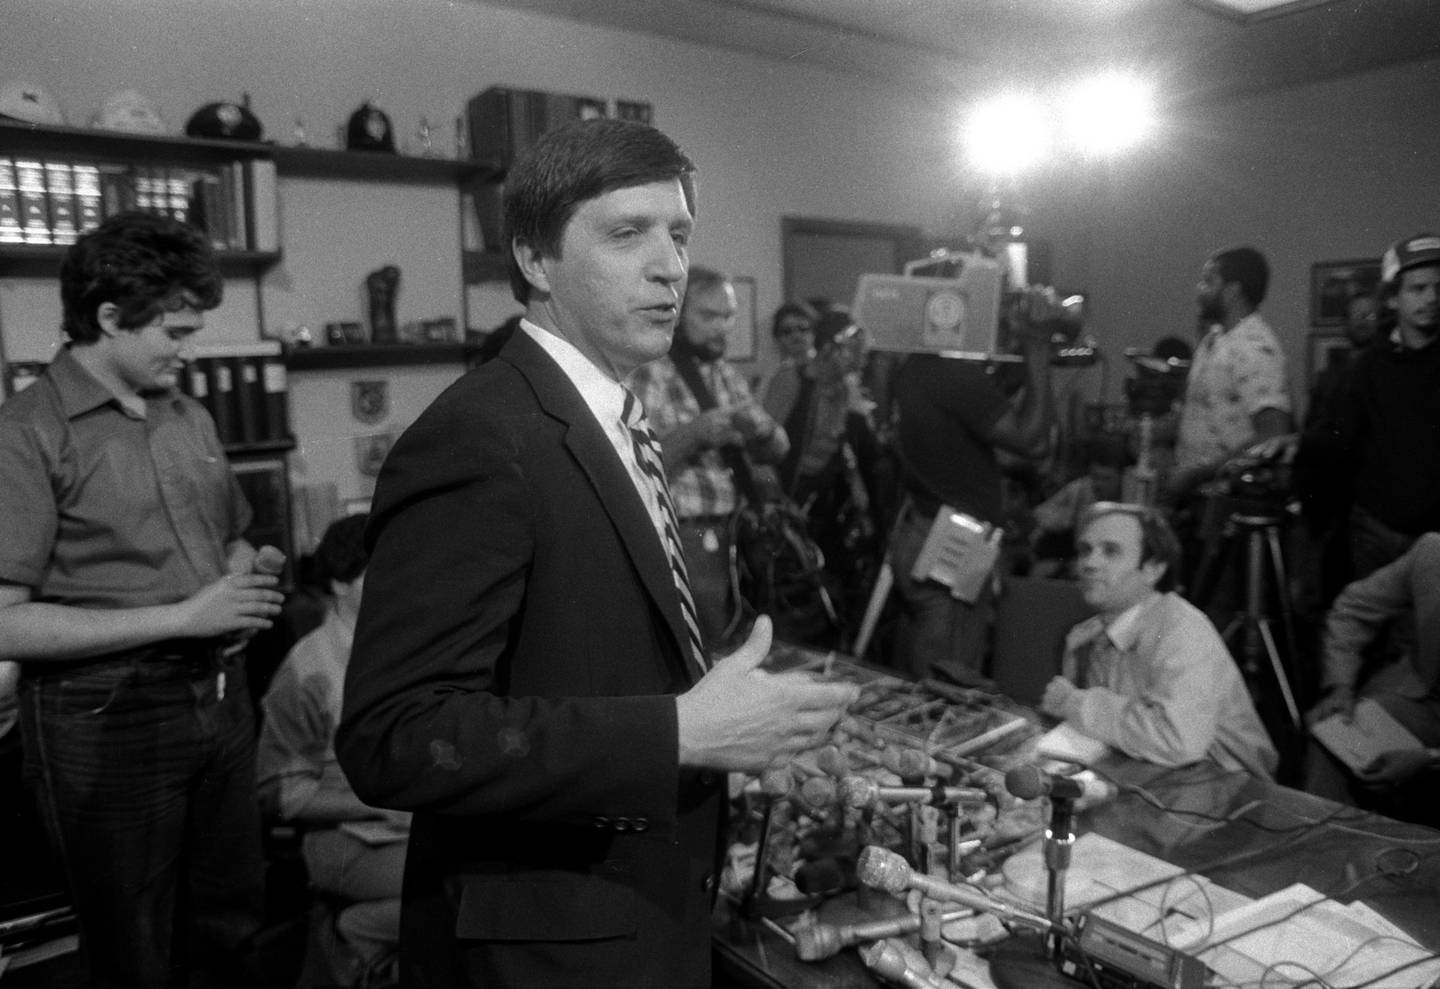 Chicago police Superintendent Richard Brzeczek talks about the investigation into the death of Paula Prince at an October 1982 news conference.